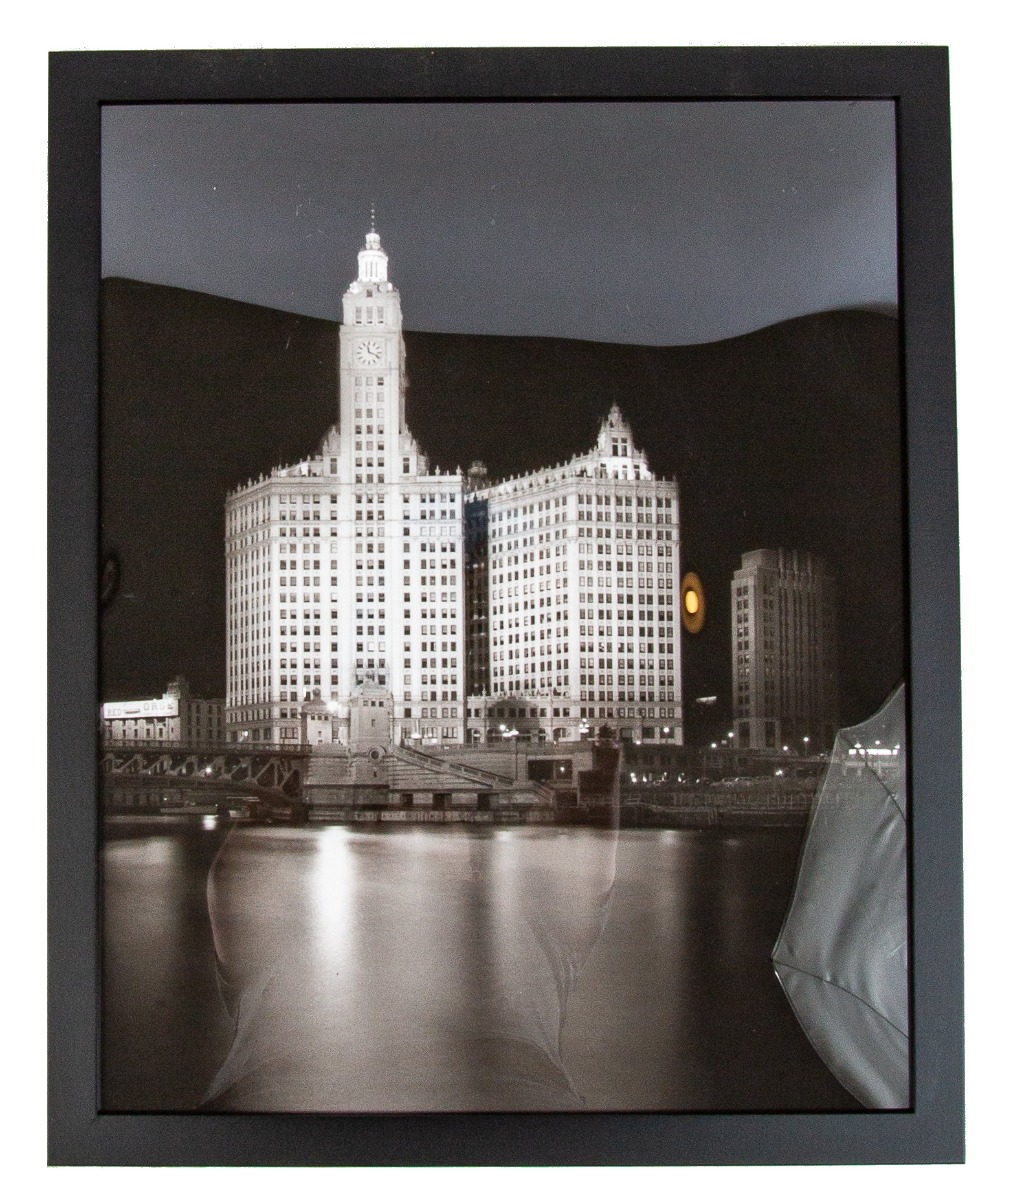 framed 16 x 20 photographic print of graham, anderson, probst & white's wrigley building at night